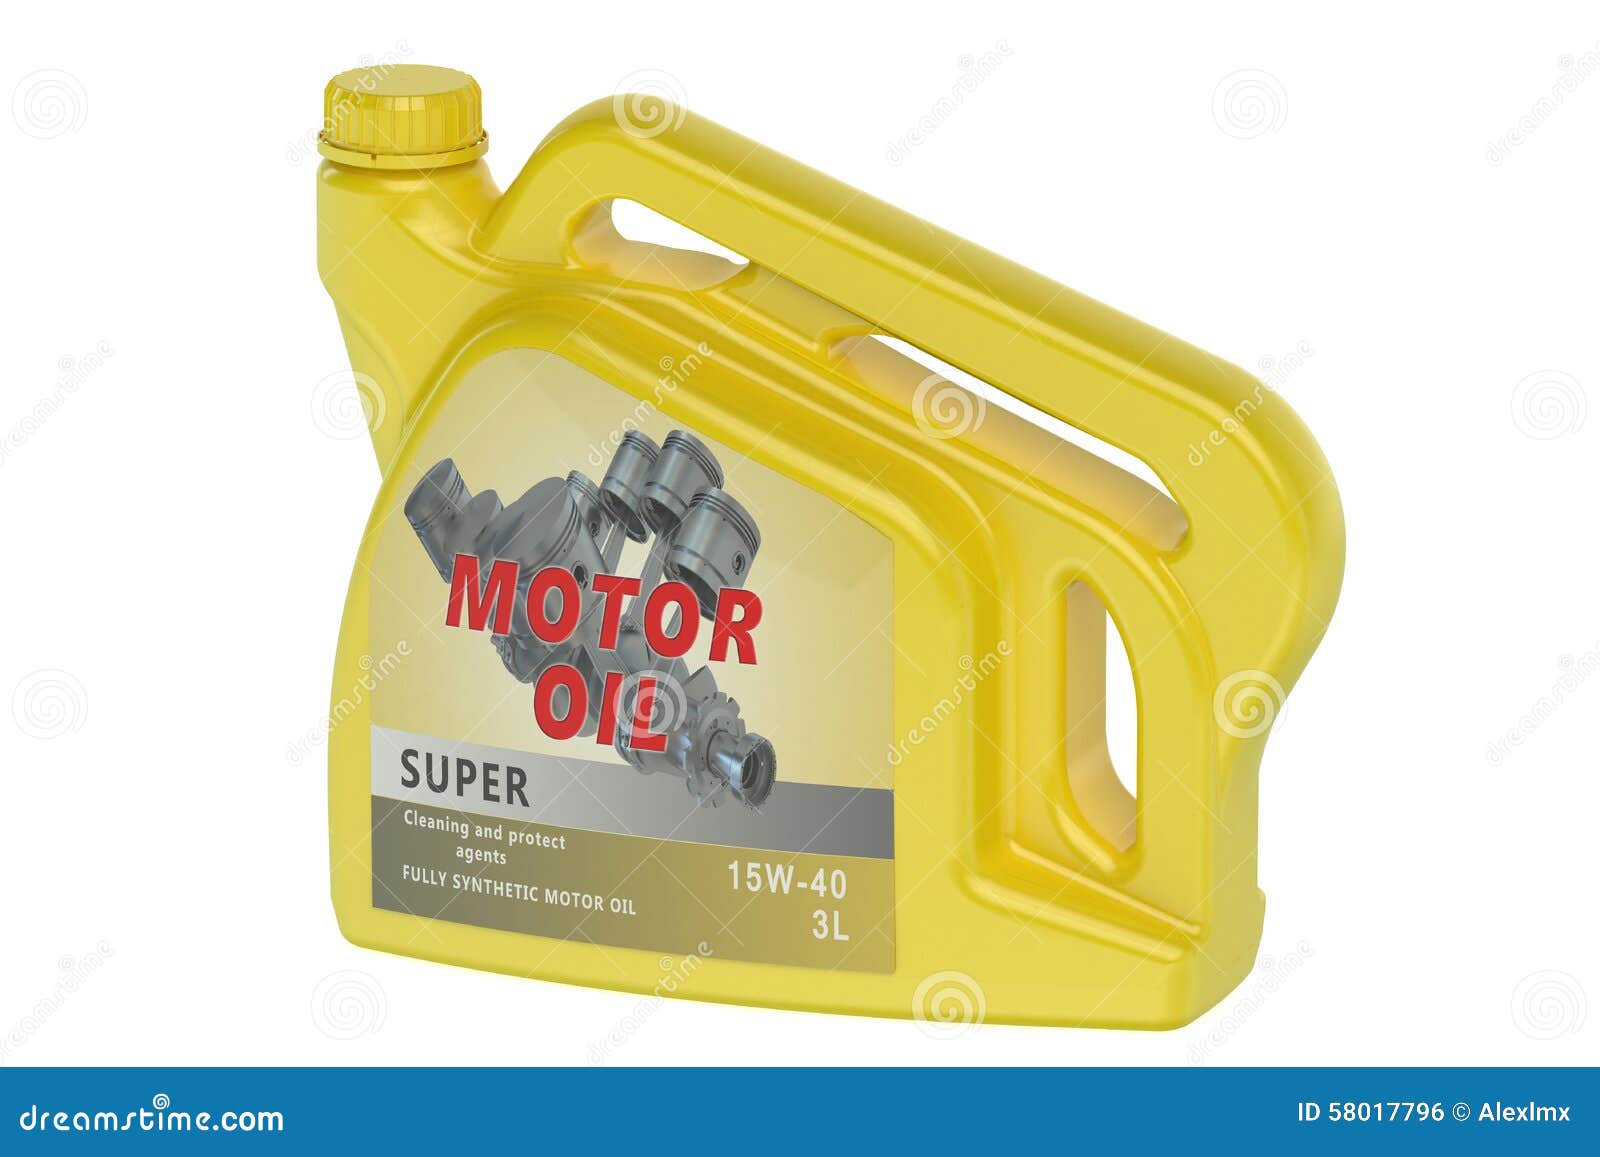 Yellow canister motor oil stock illustration. Illustration of clean ...